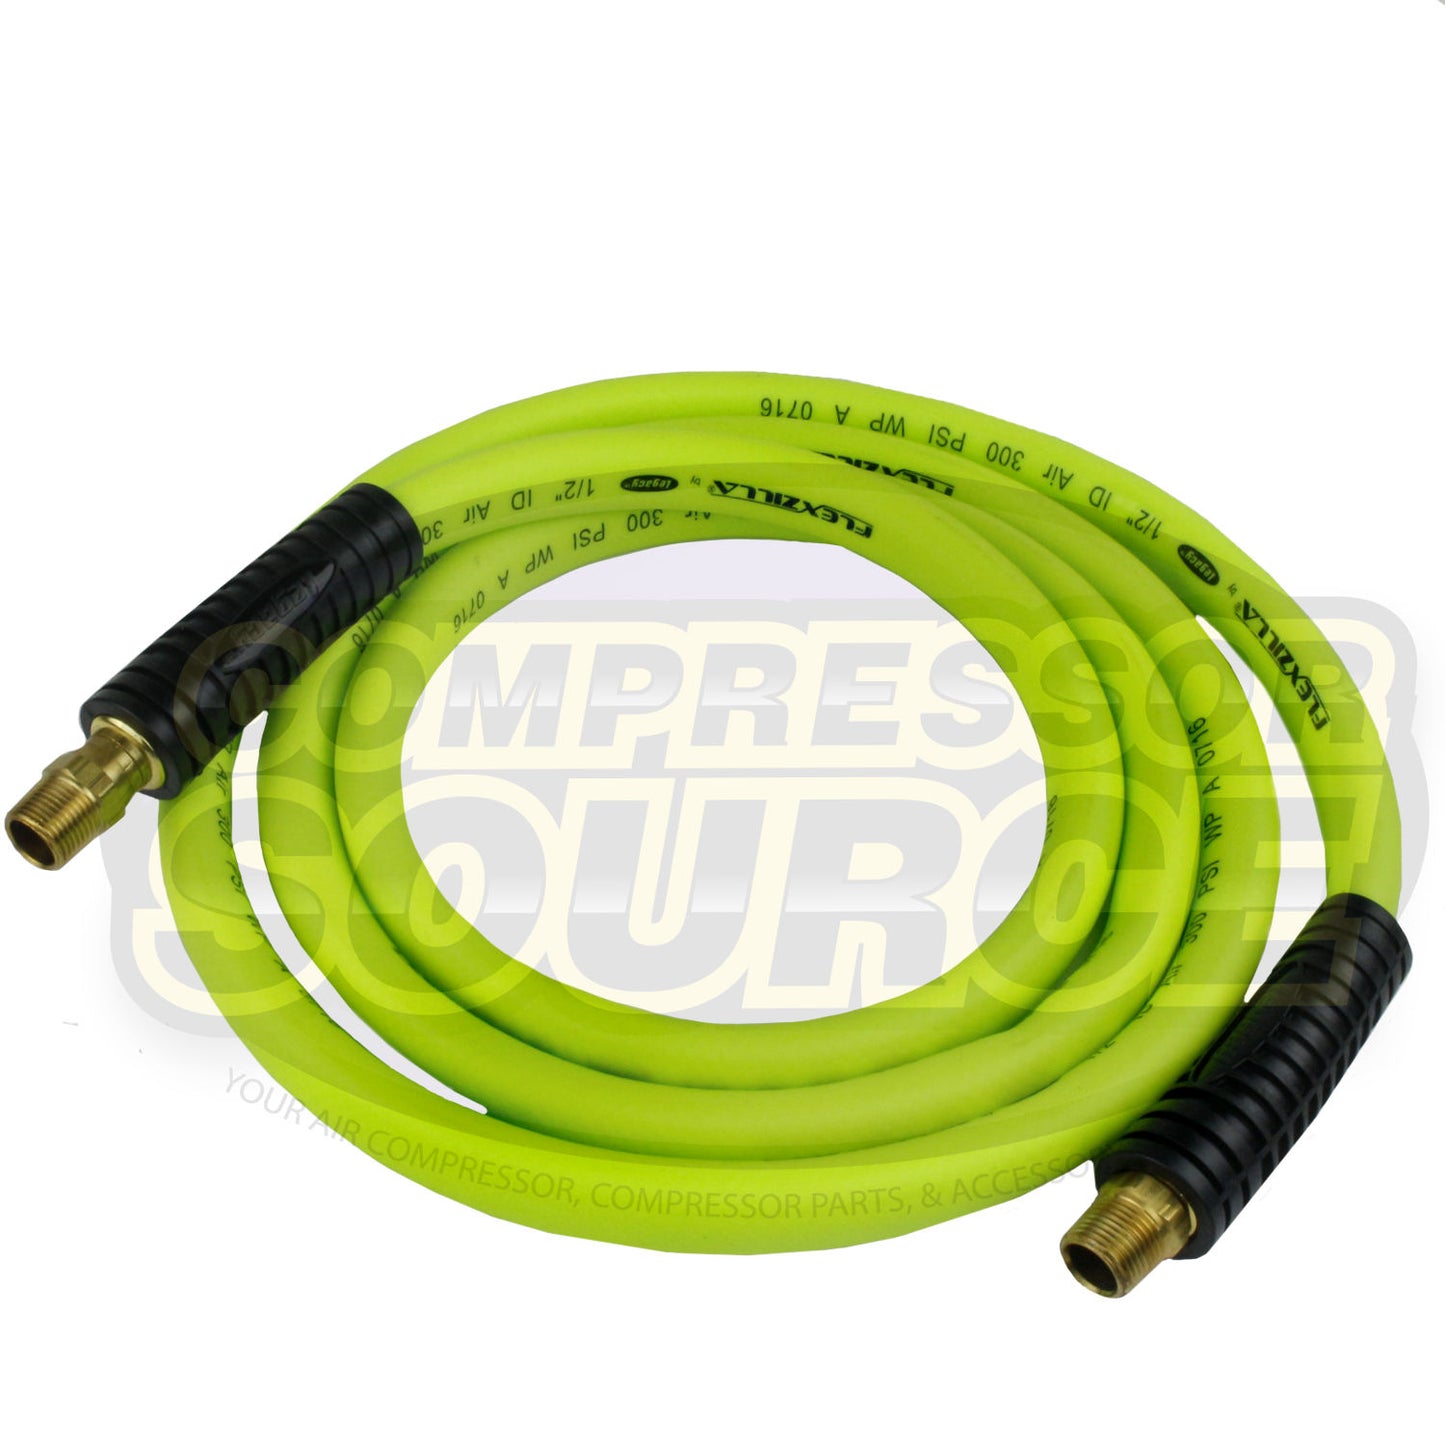 New Flexzilla 1/2 x 8' FT Air Hose Whip With 3/8' MNPT Swivel HFZ1208 –  compressor-source